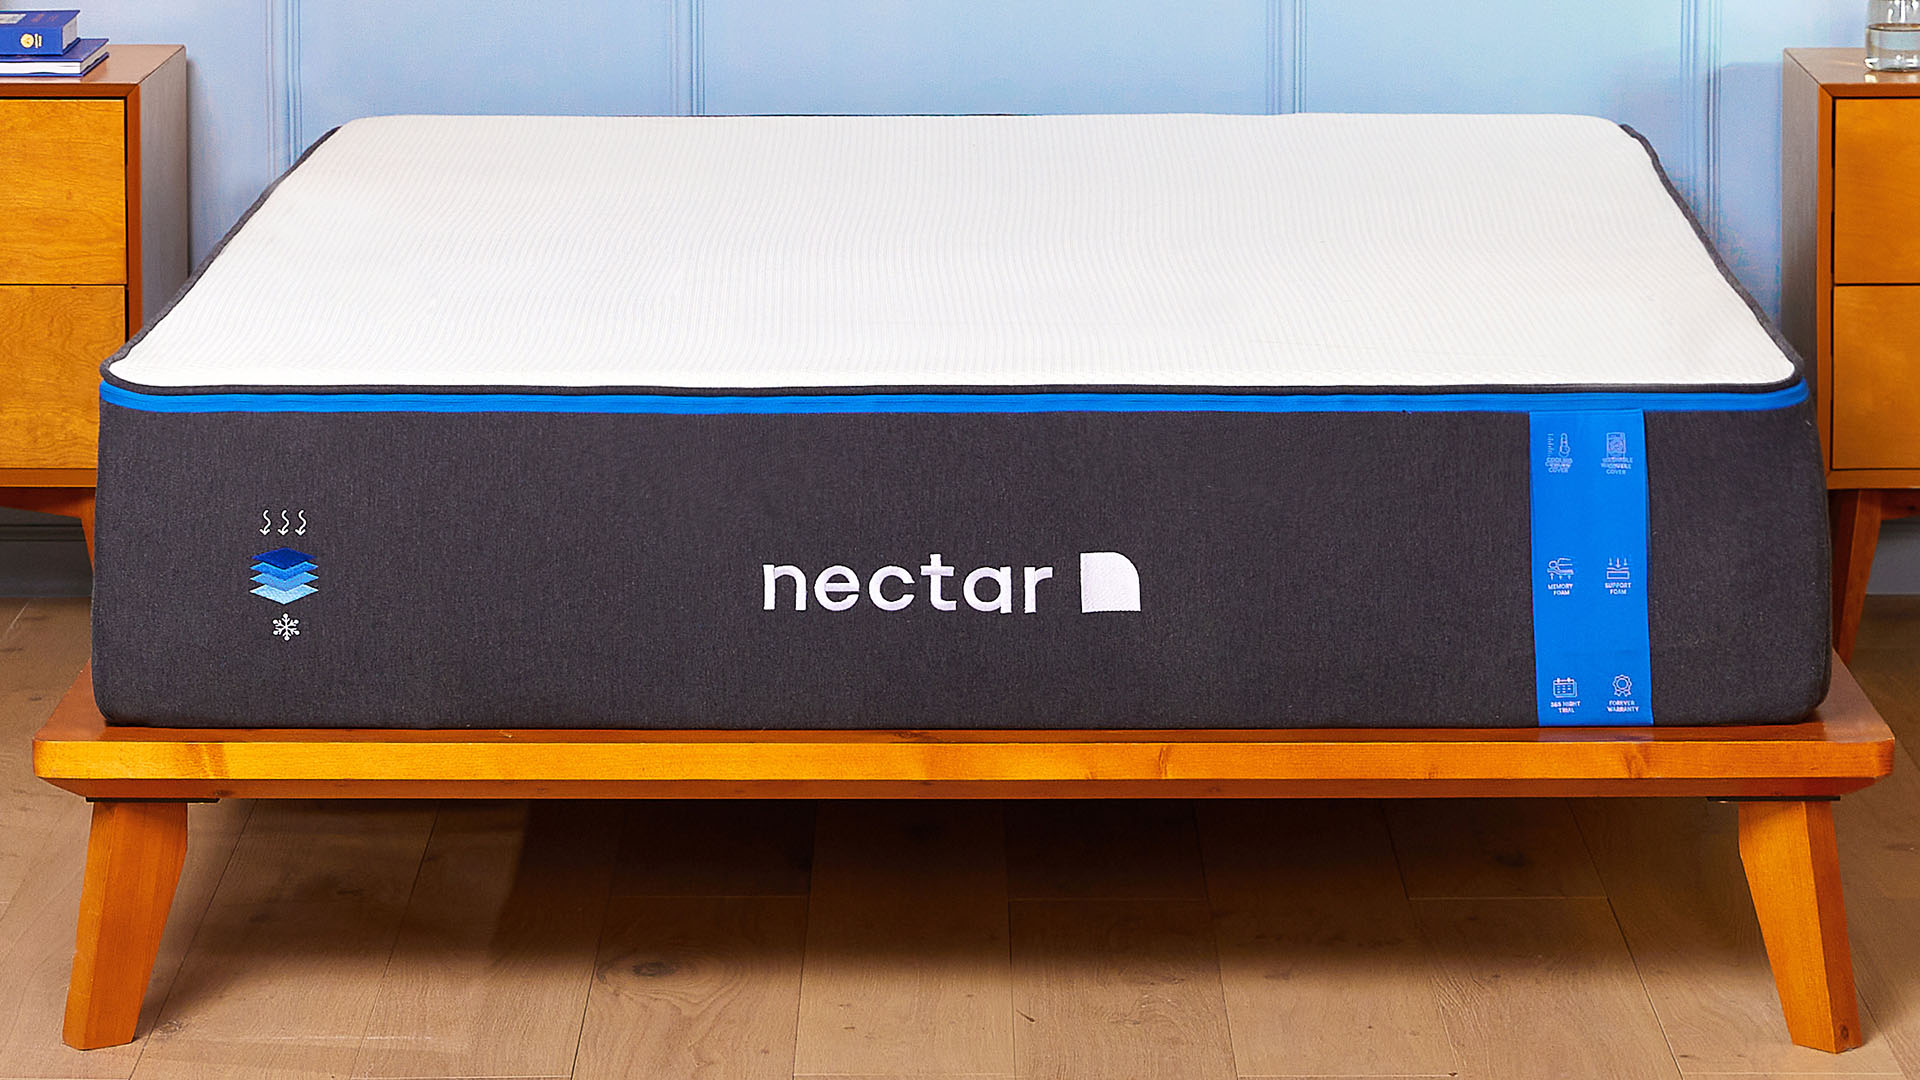 Nectar mattress in a box, set up in a bedroom